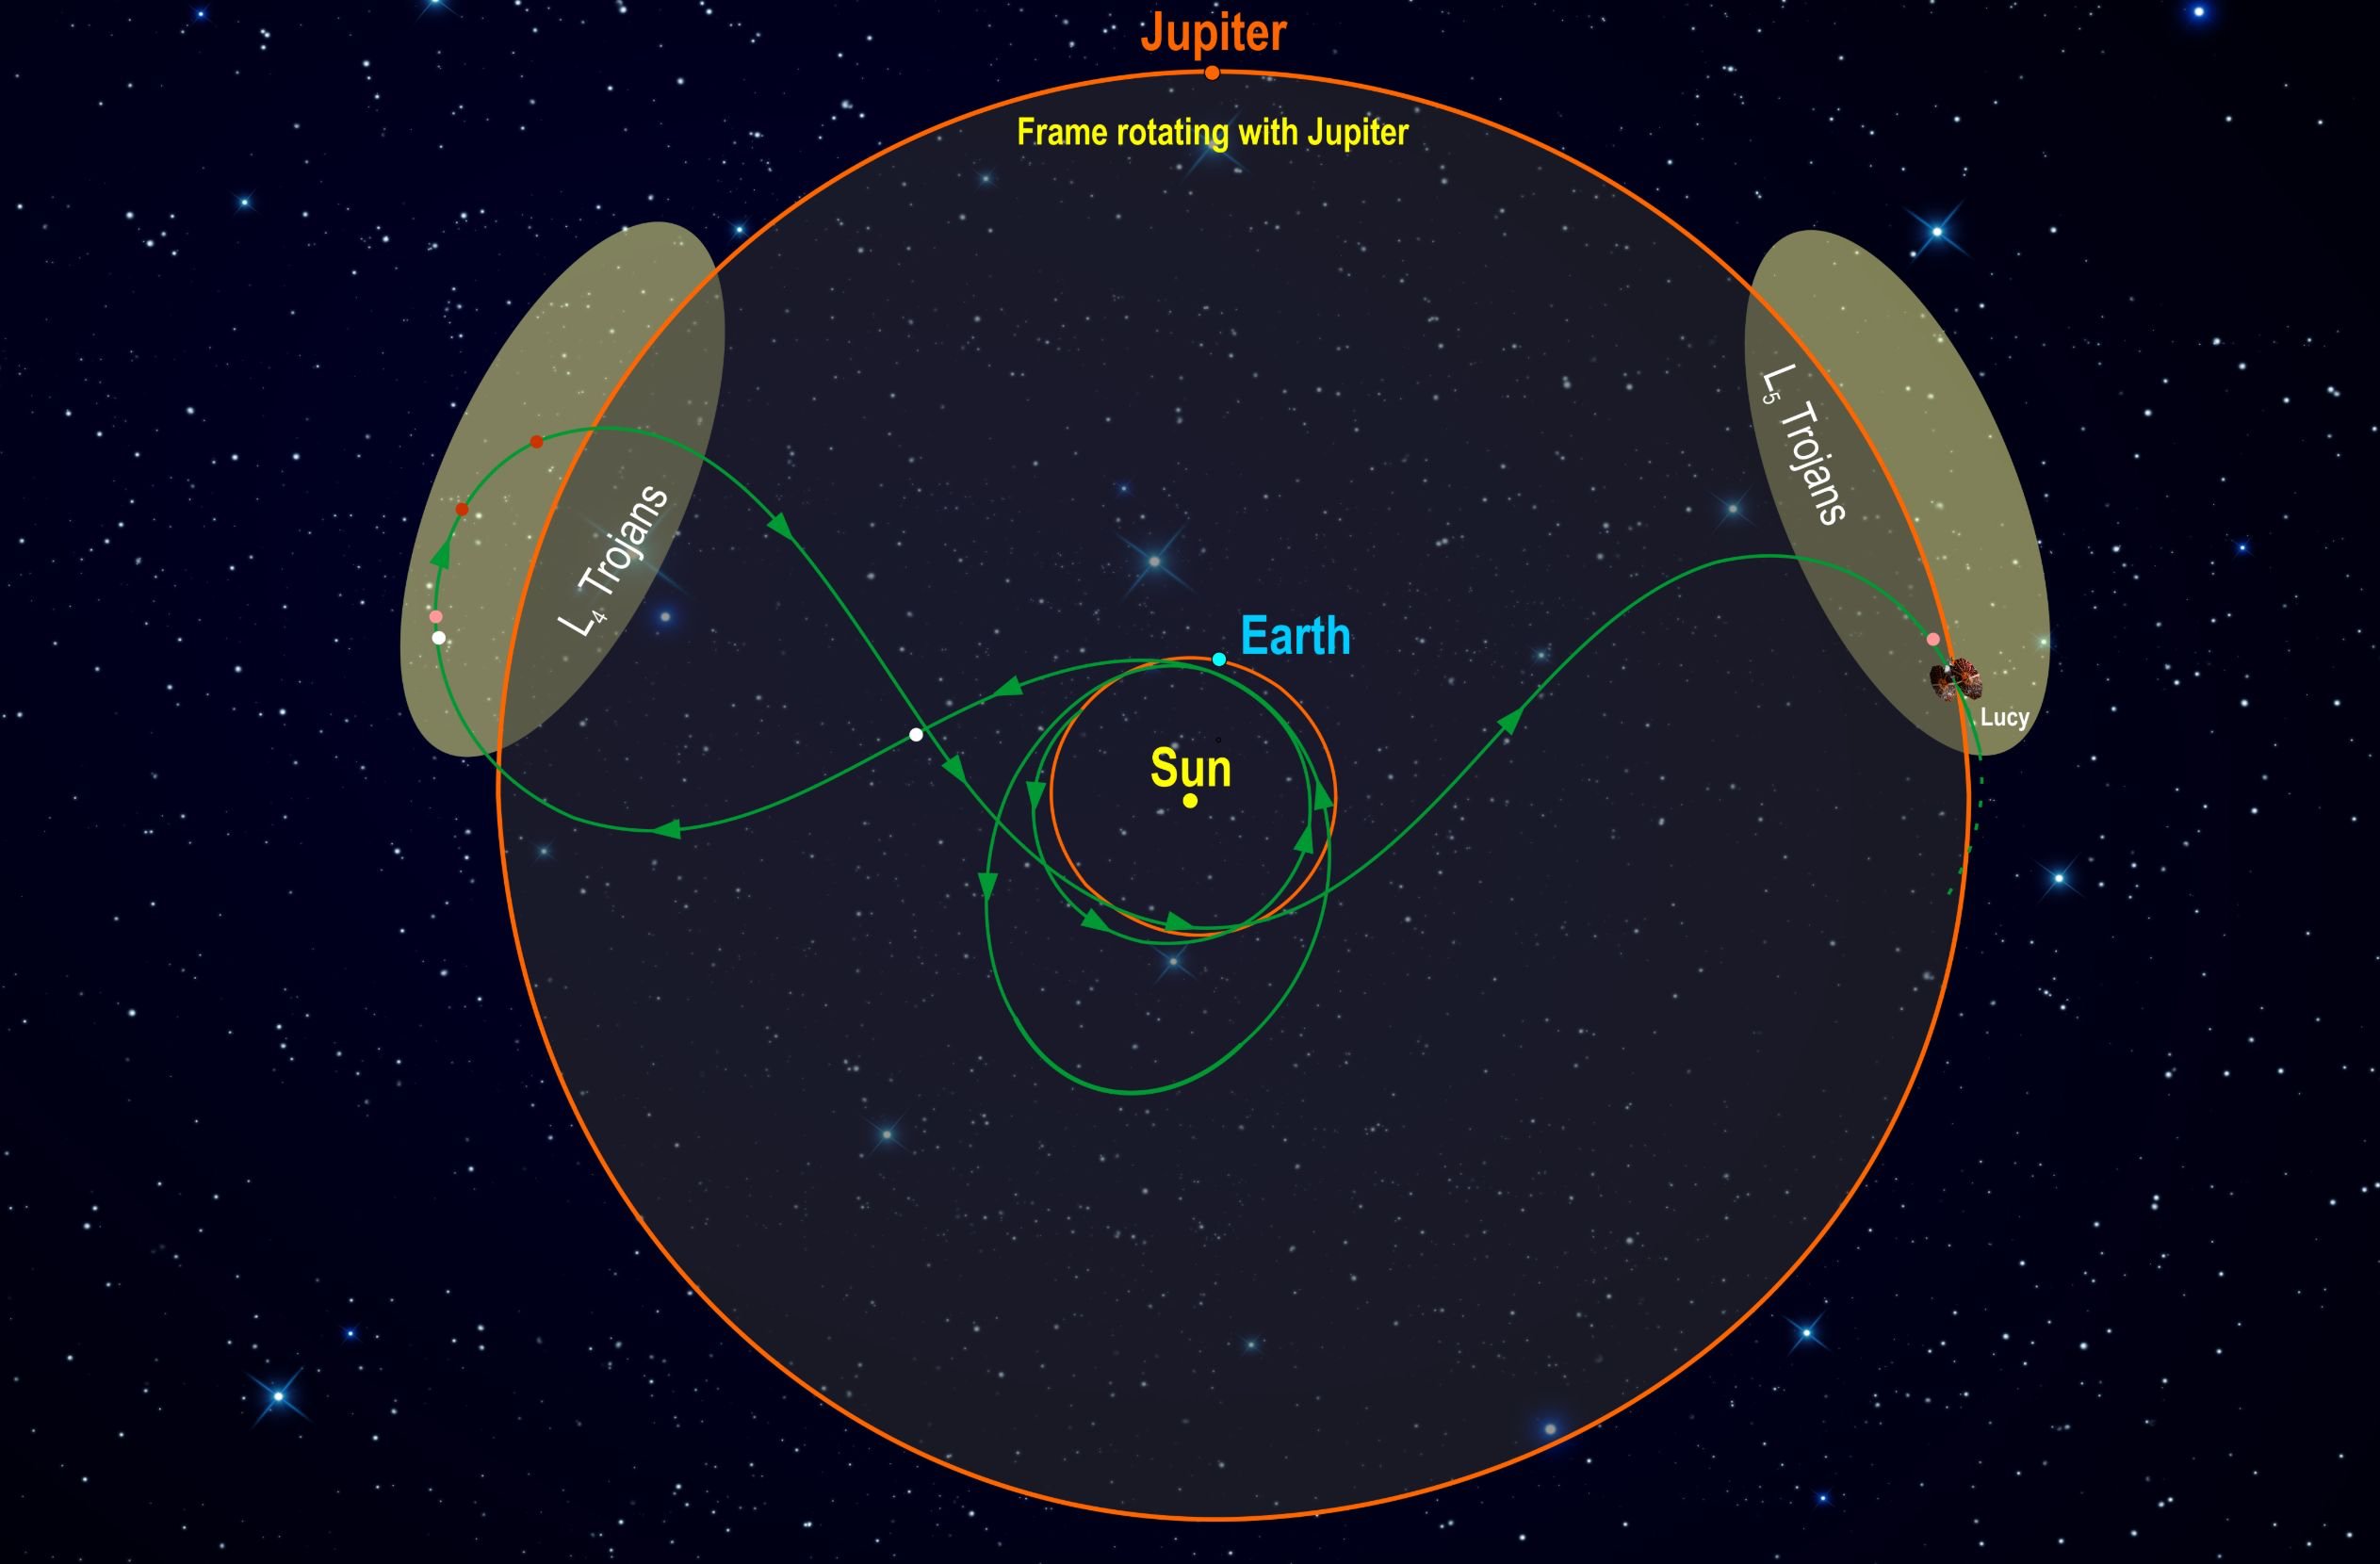 The Lucy spacecraft will visit both Trojan asteroid swarms during its 12-year mission. Illustration by NASA